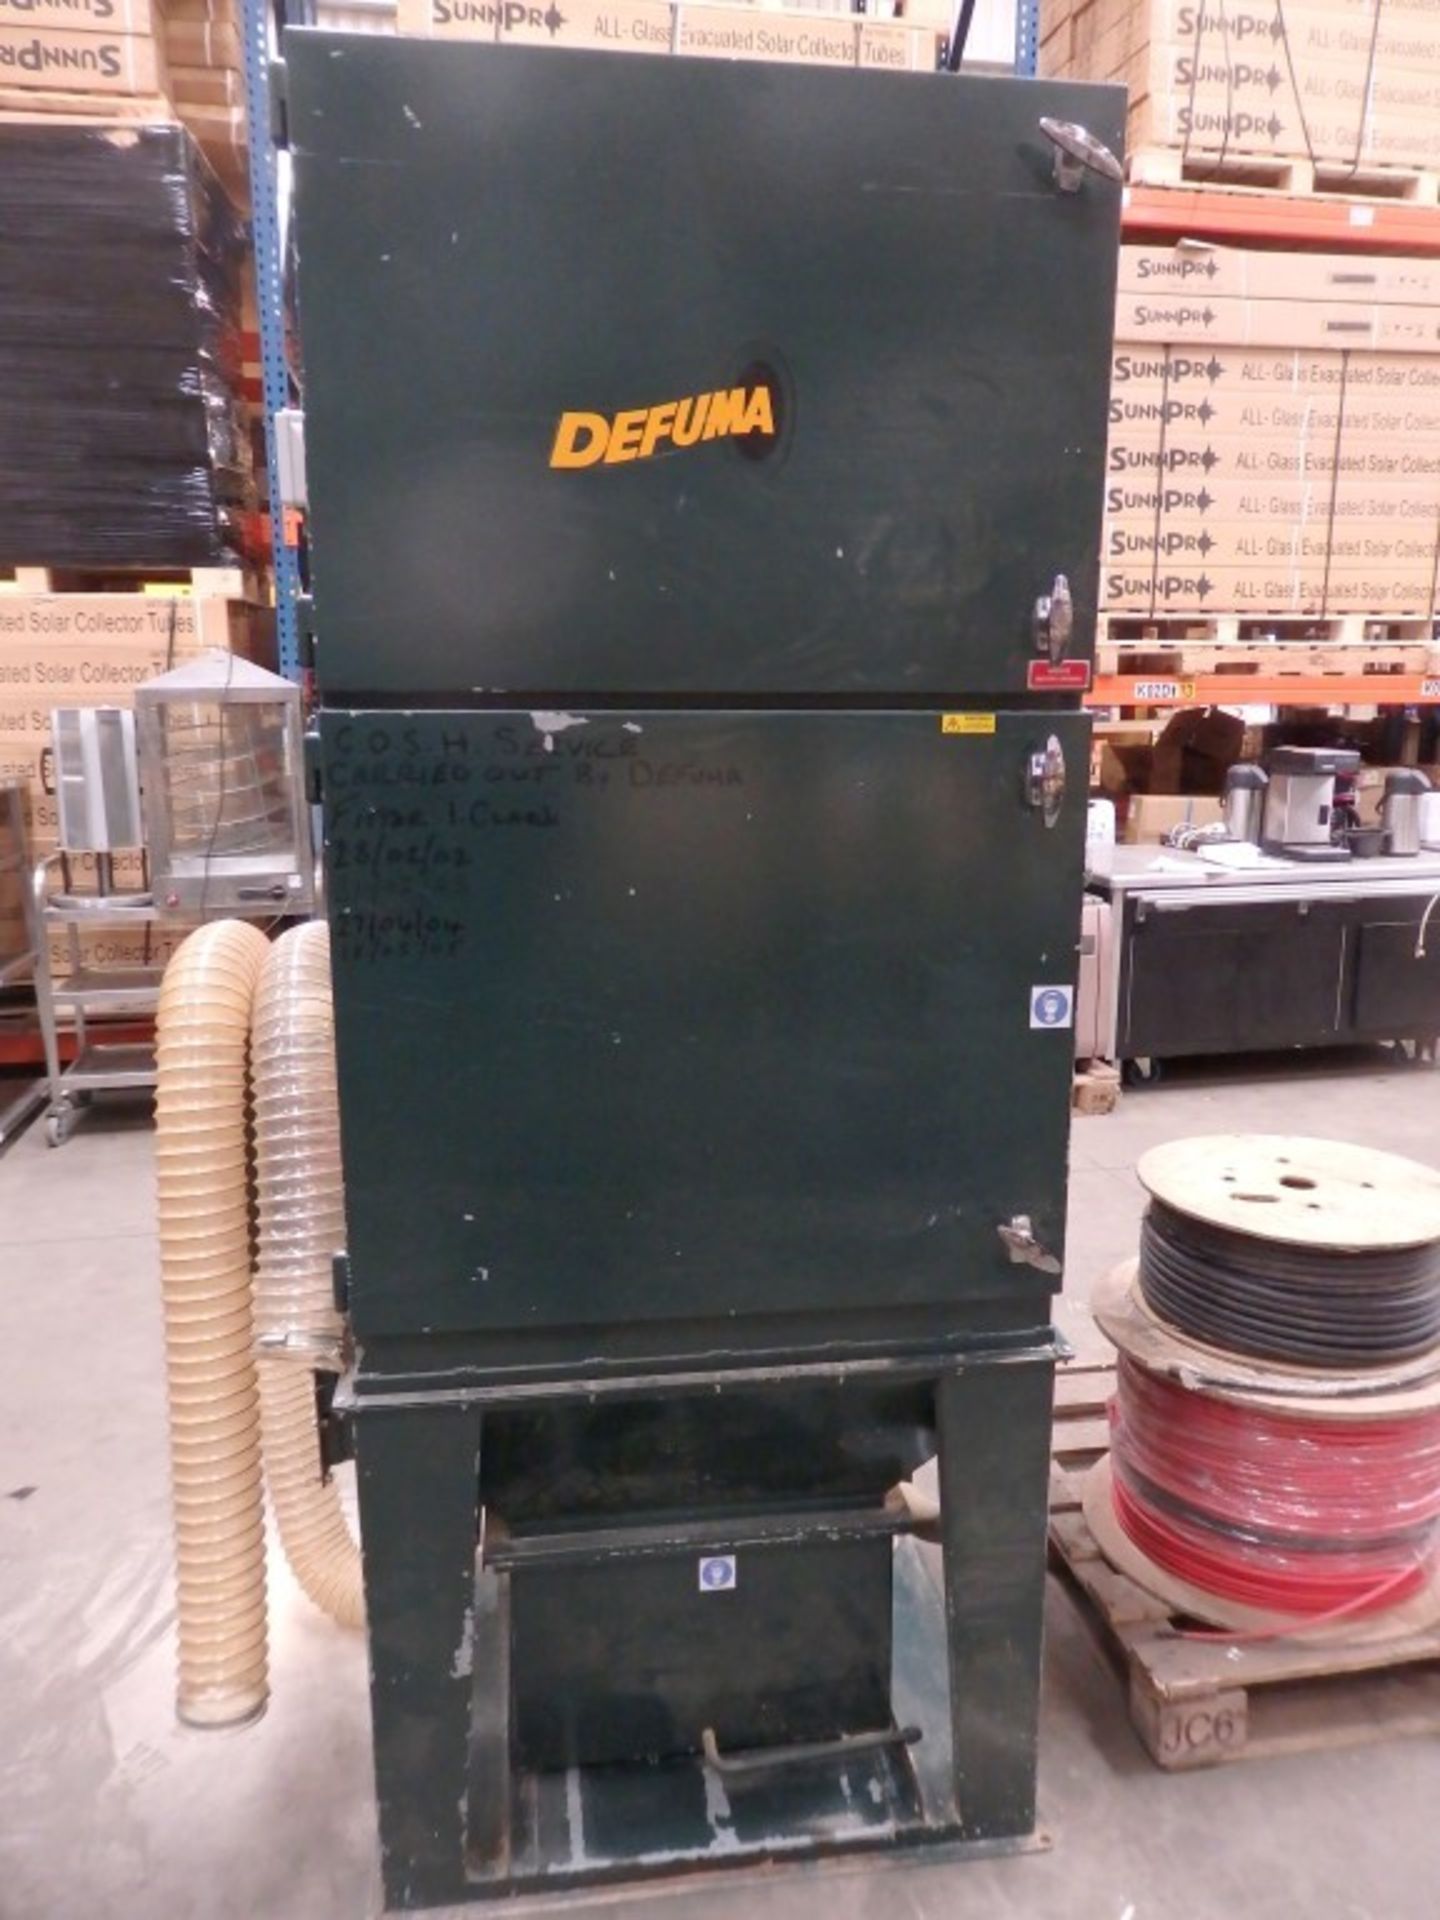 1 x Pefurma Dust Extractor - Compact self-contained unit - CL057 - Ref WPM098 - Location: Welwyn,